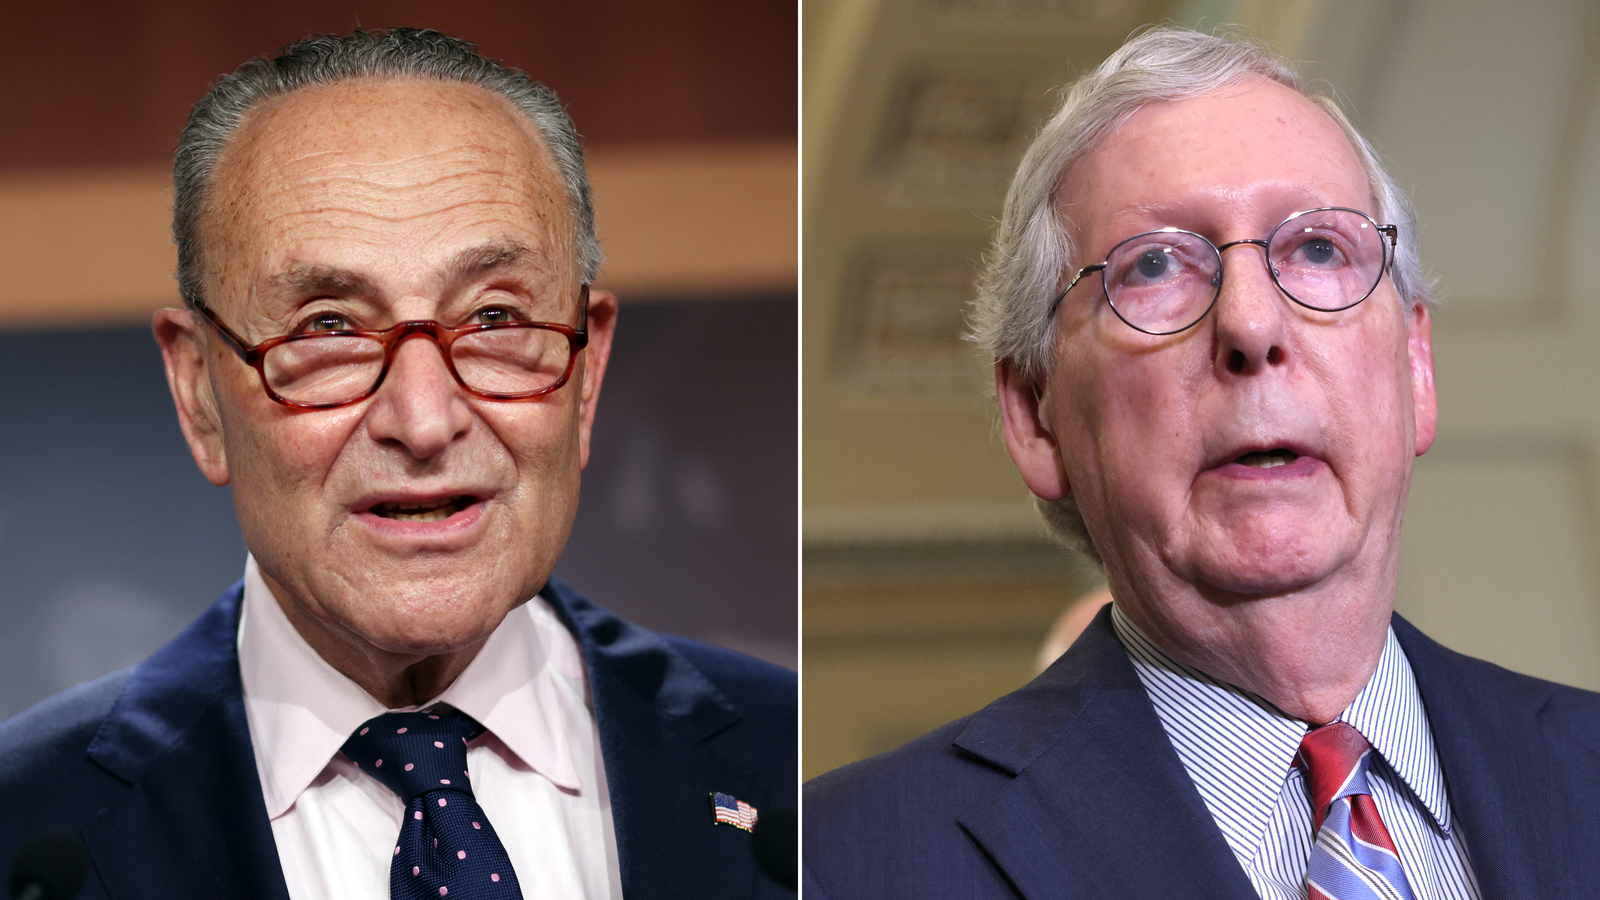 From left to right, US Senate Majority Leader Chuck Schumer, and US Senate Minority Leader Mitch McConnell